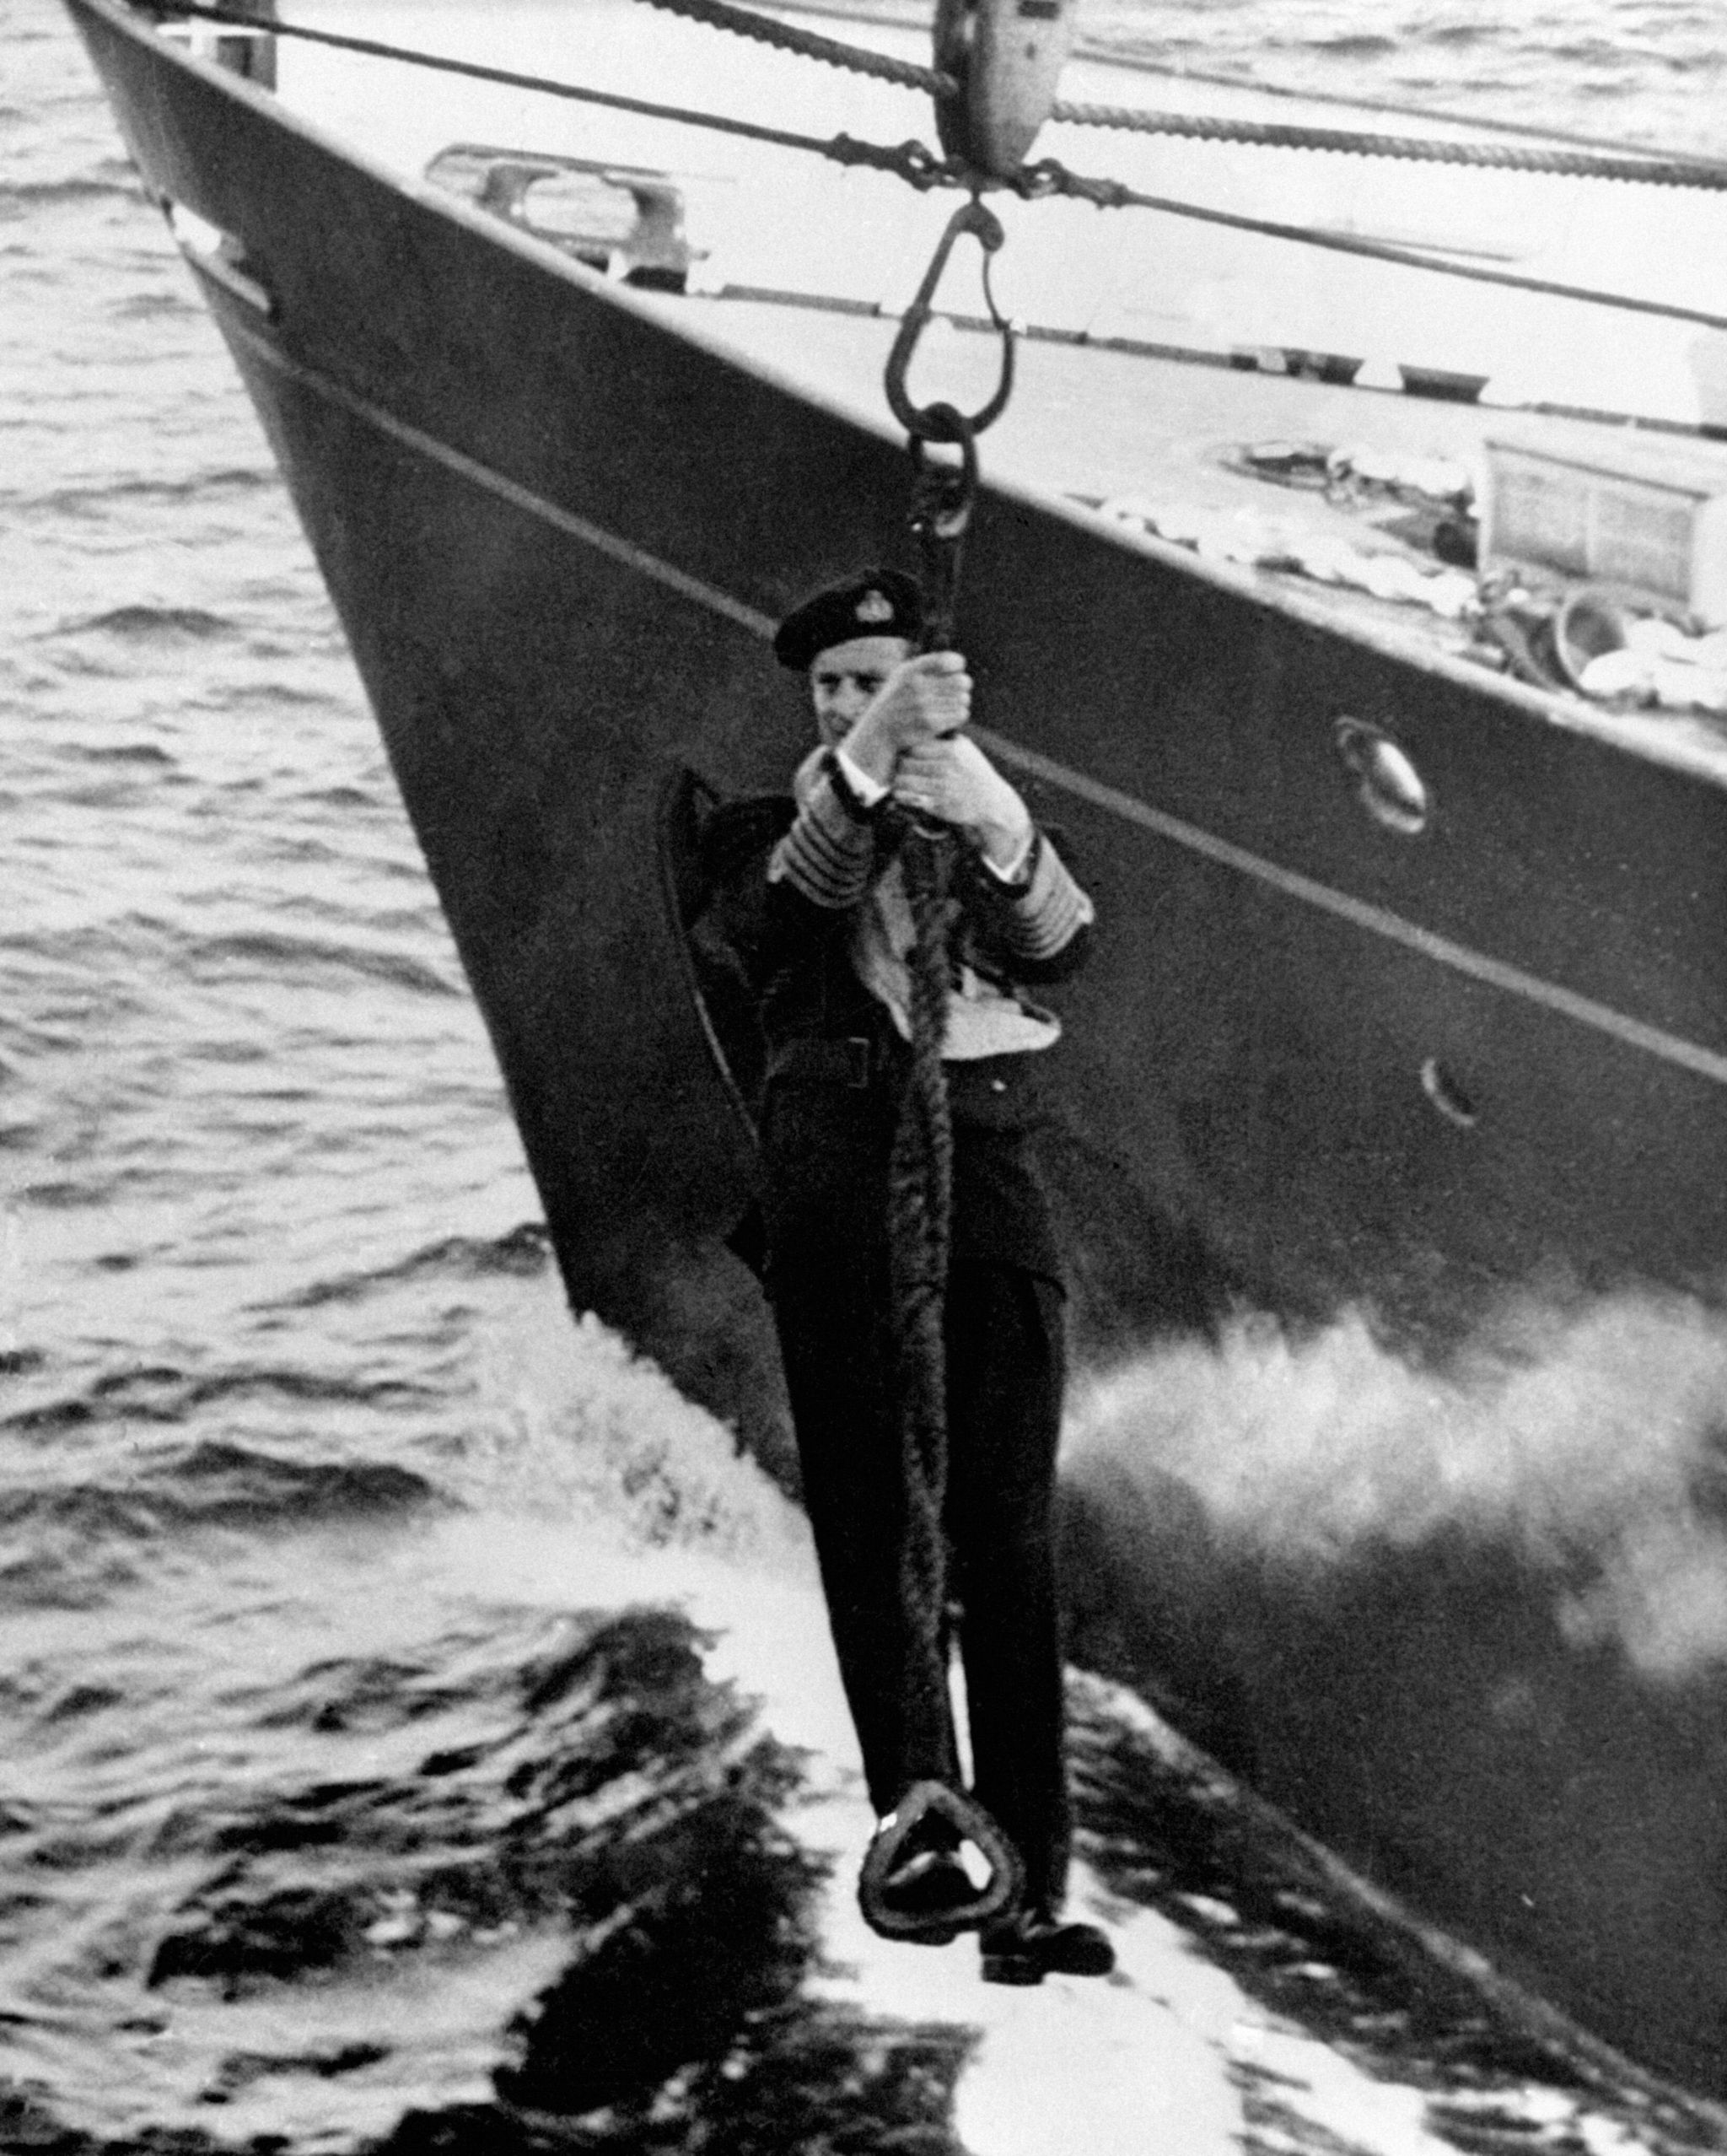 Prince Philip during his naval days